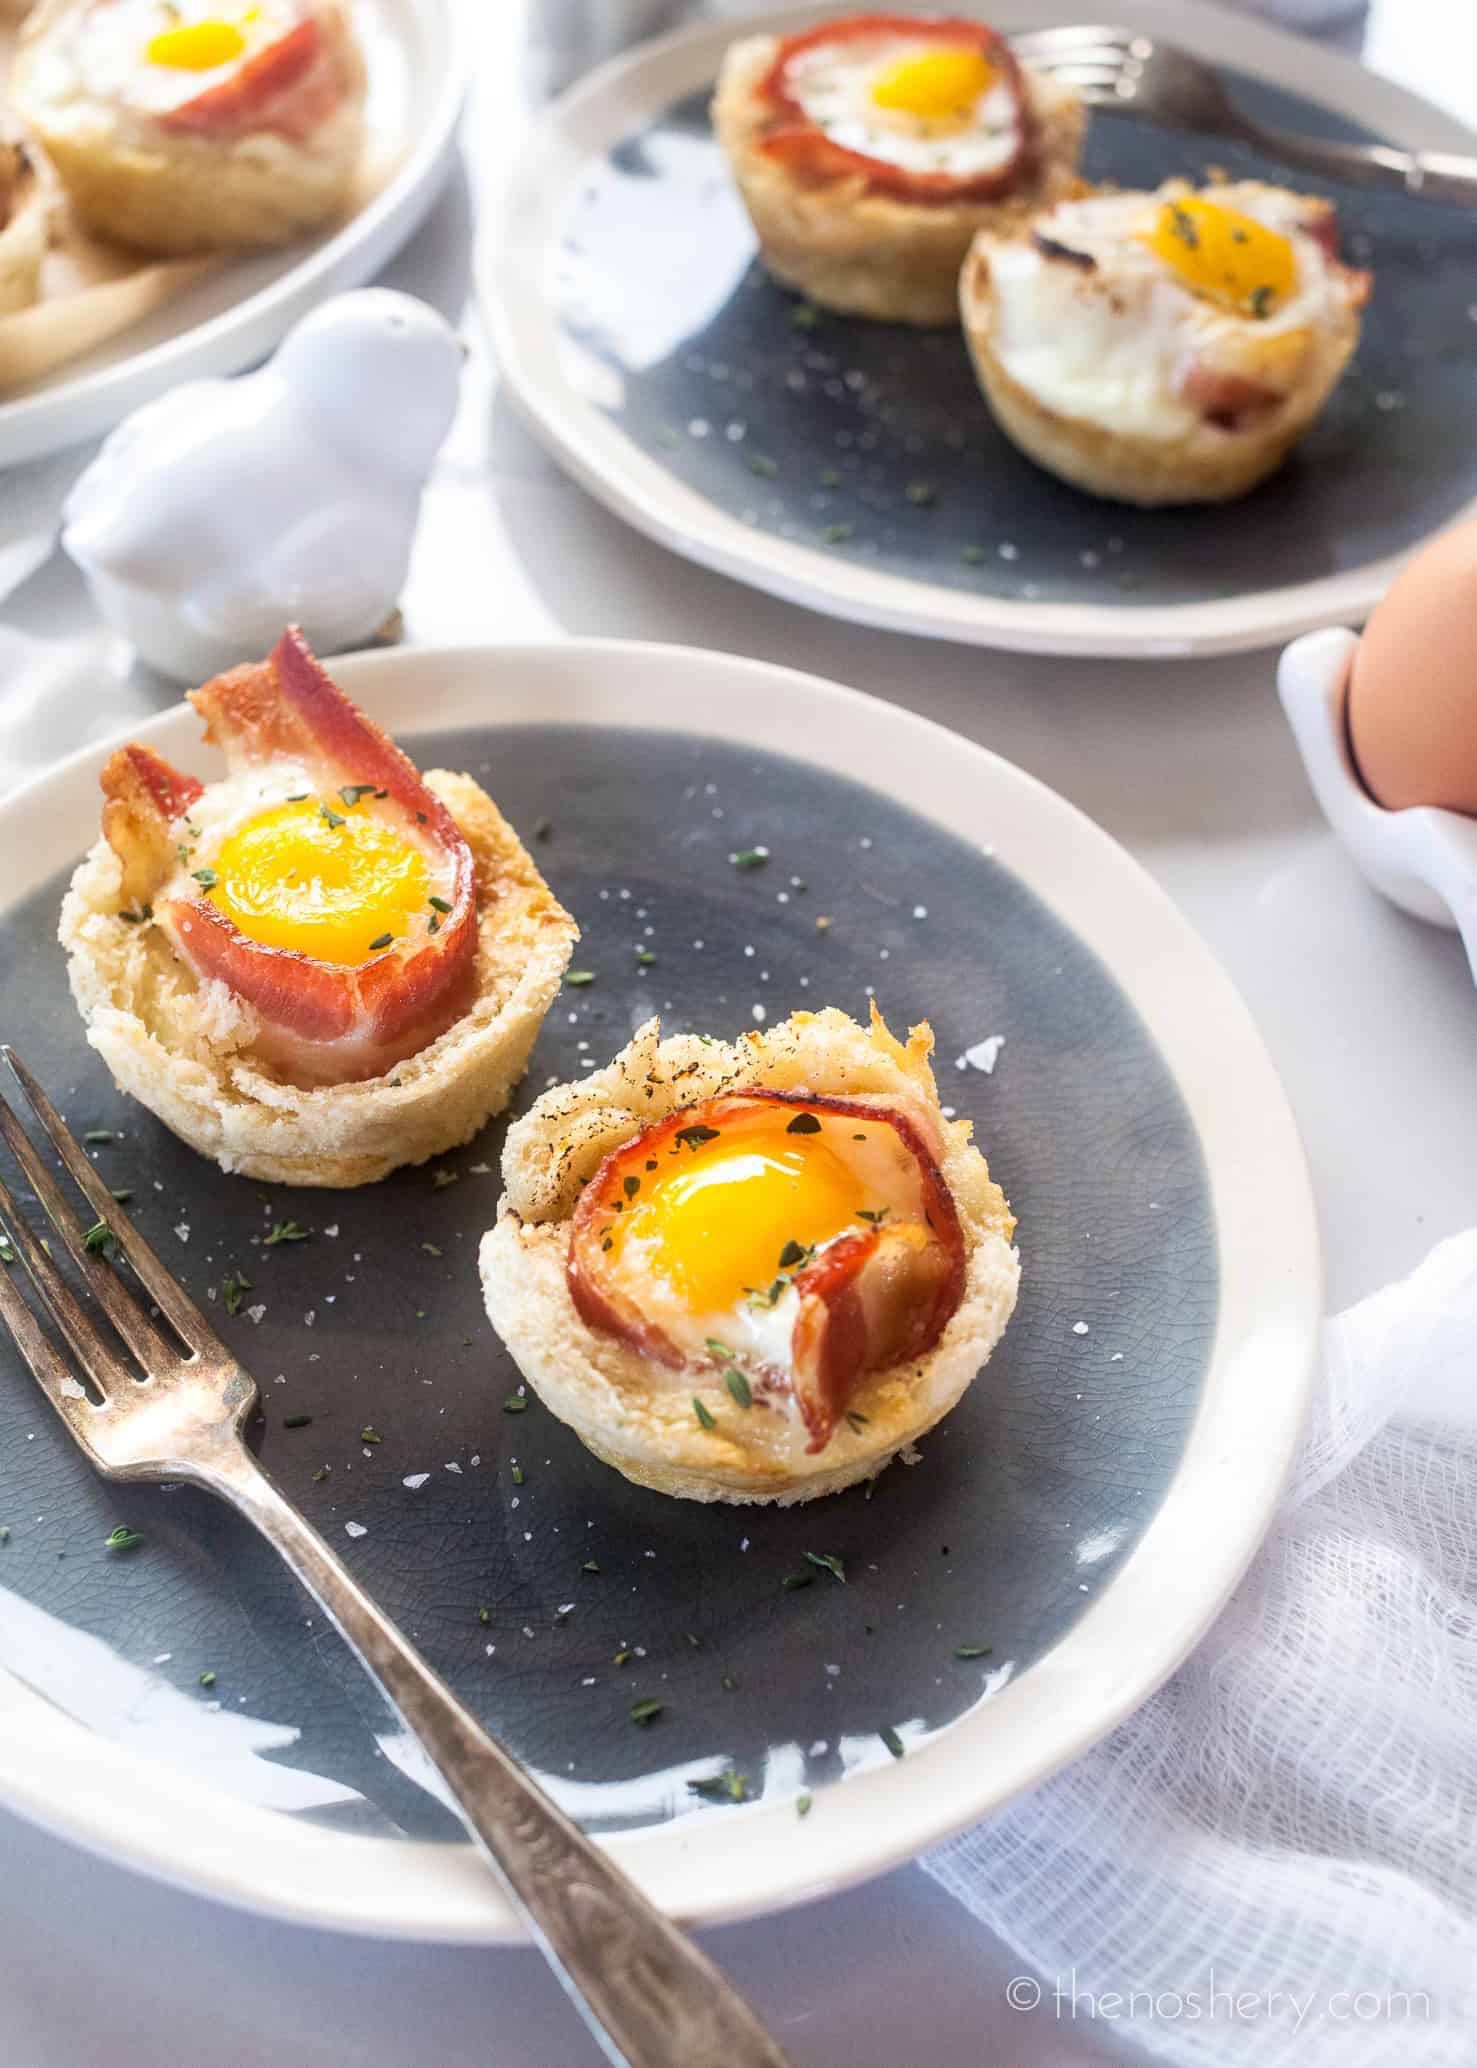 https://thenoshery.com/wp-content/uploads/2018/03/Bacon-and-Egg-Toastcups-9.jpg